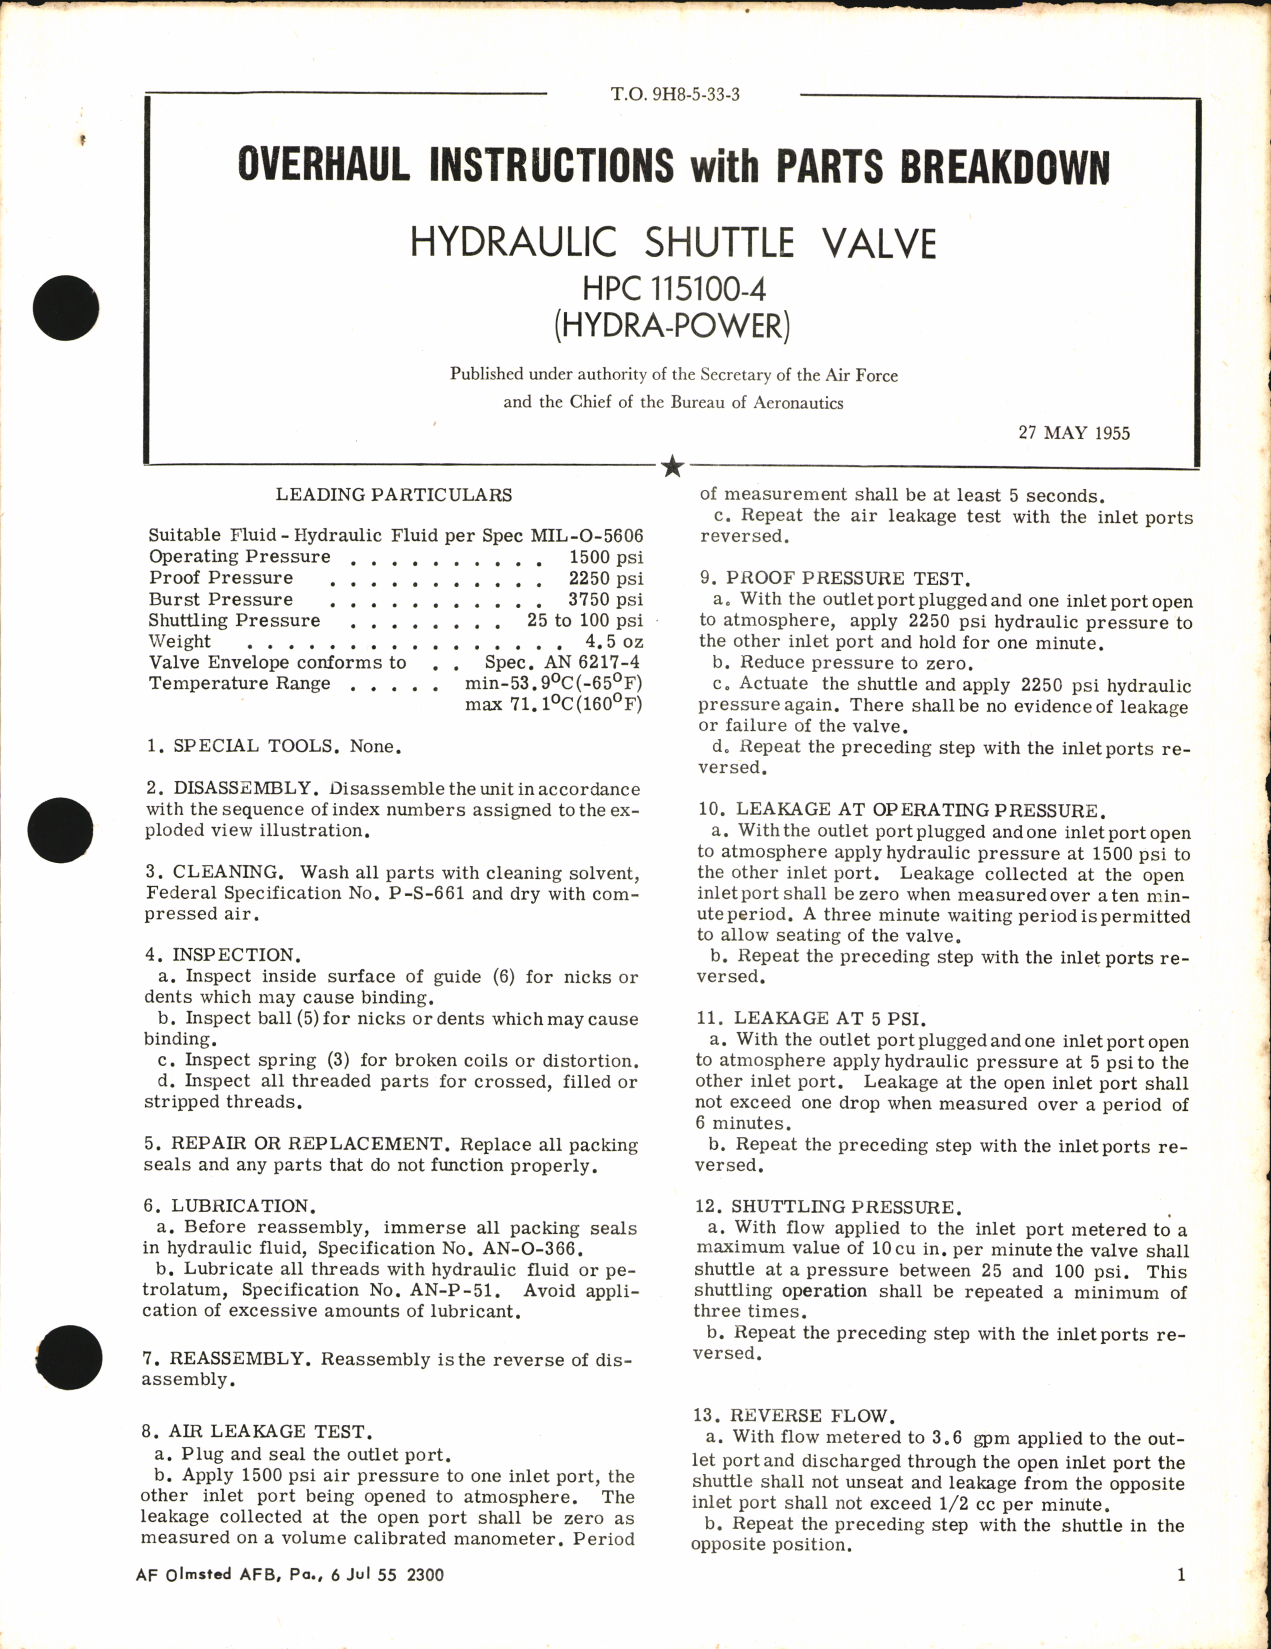 Sample page 1 from AirCorps Library document: Overhaul Instructions with Parts Breakdown for Hydraulic Shuttle Valve HPC 115100-4